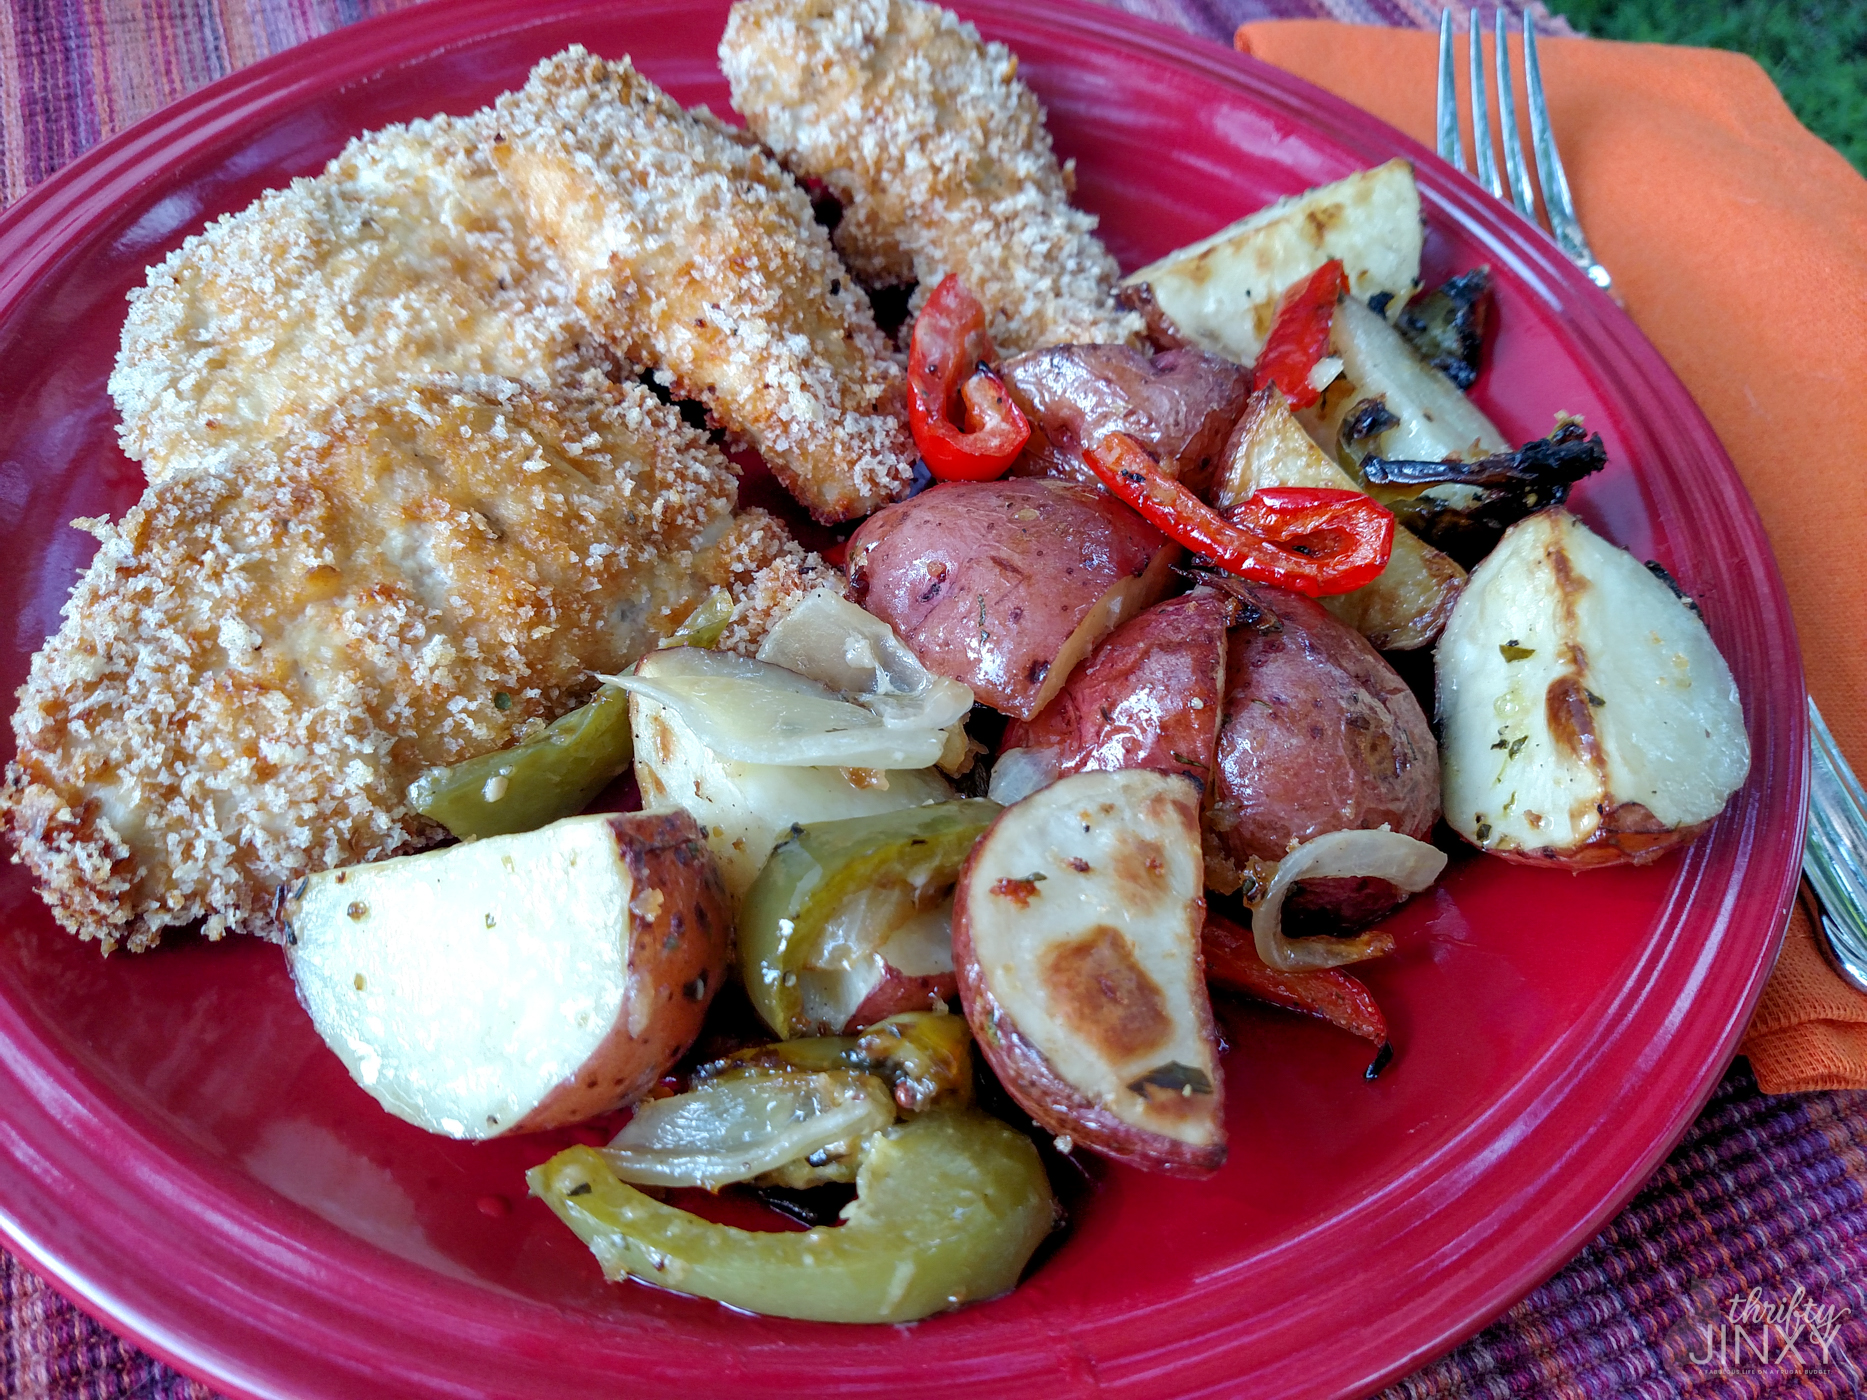 Garlic Ranch Chicken with peppers and potatoes